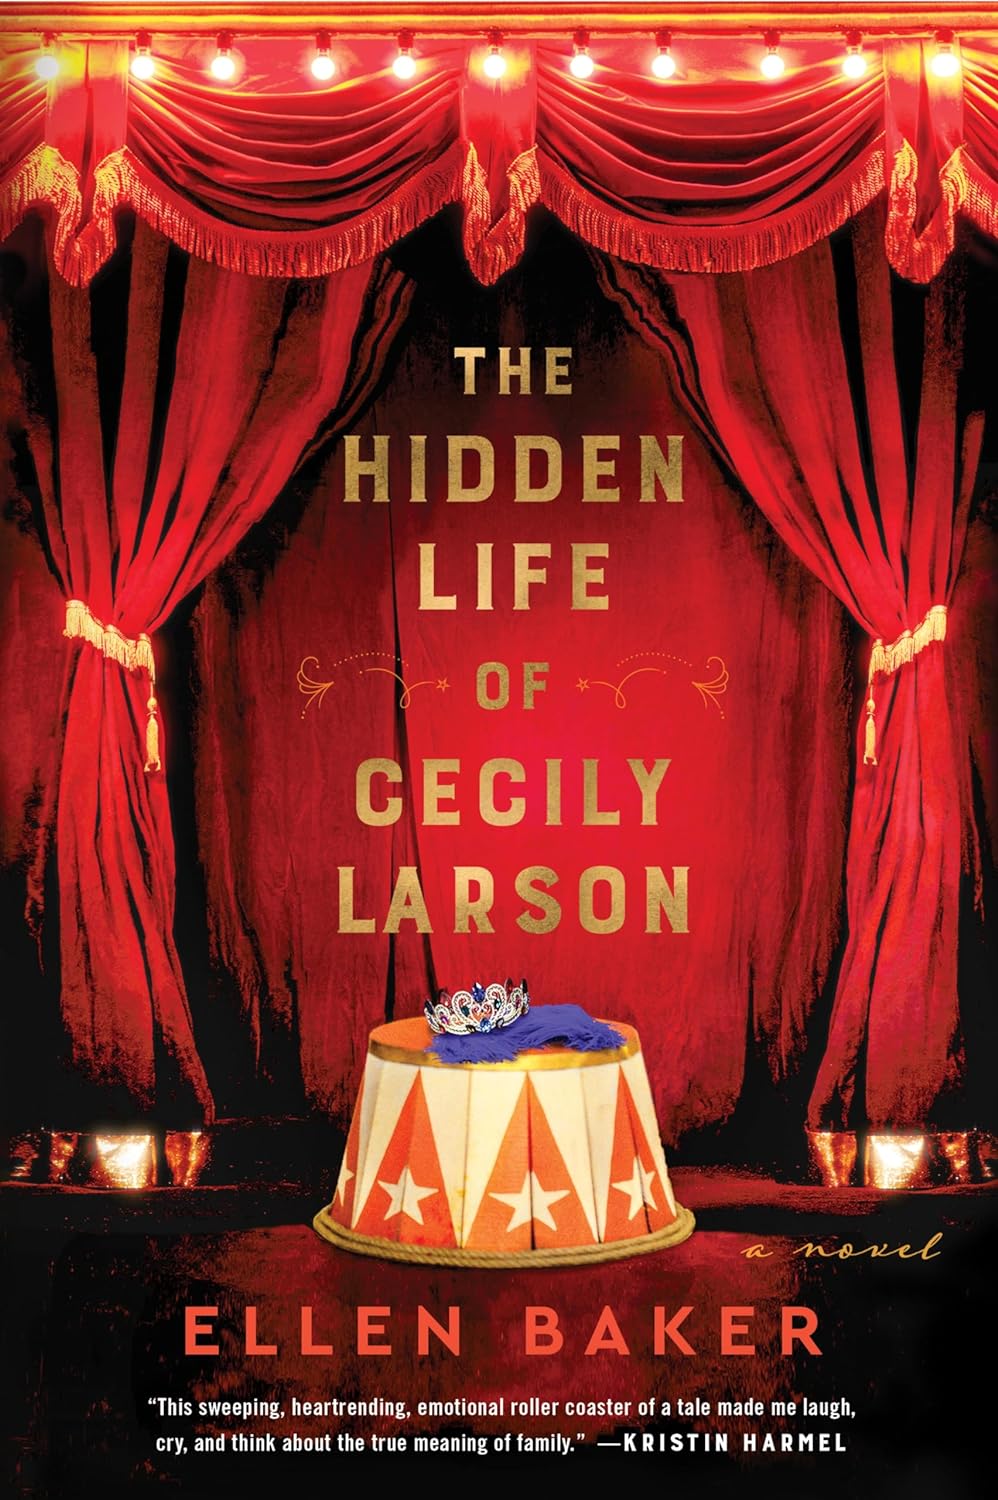 Image for "The Hidden Life of Cecily Larson"